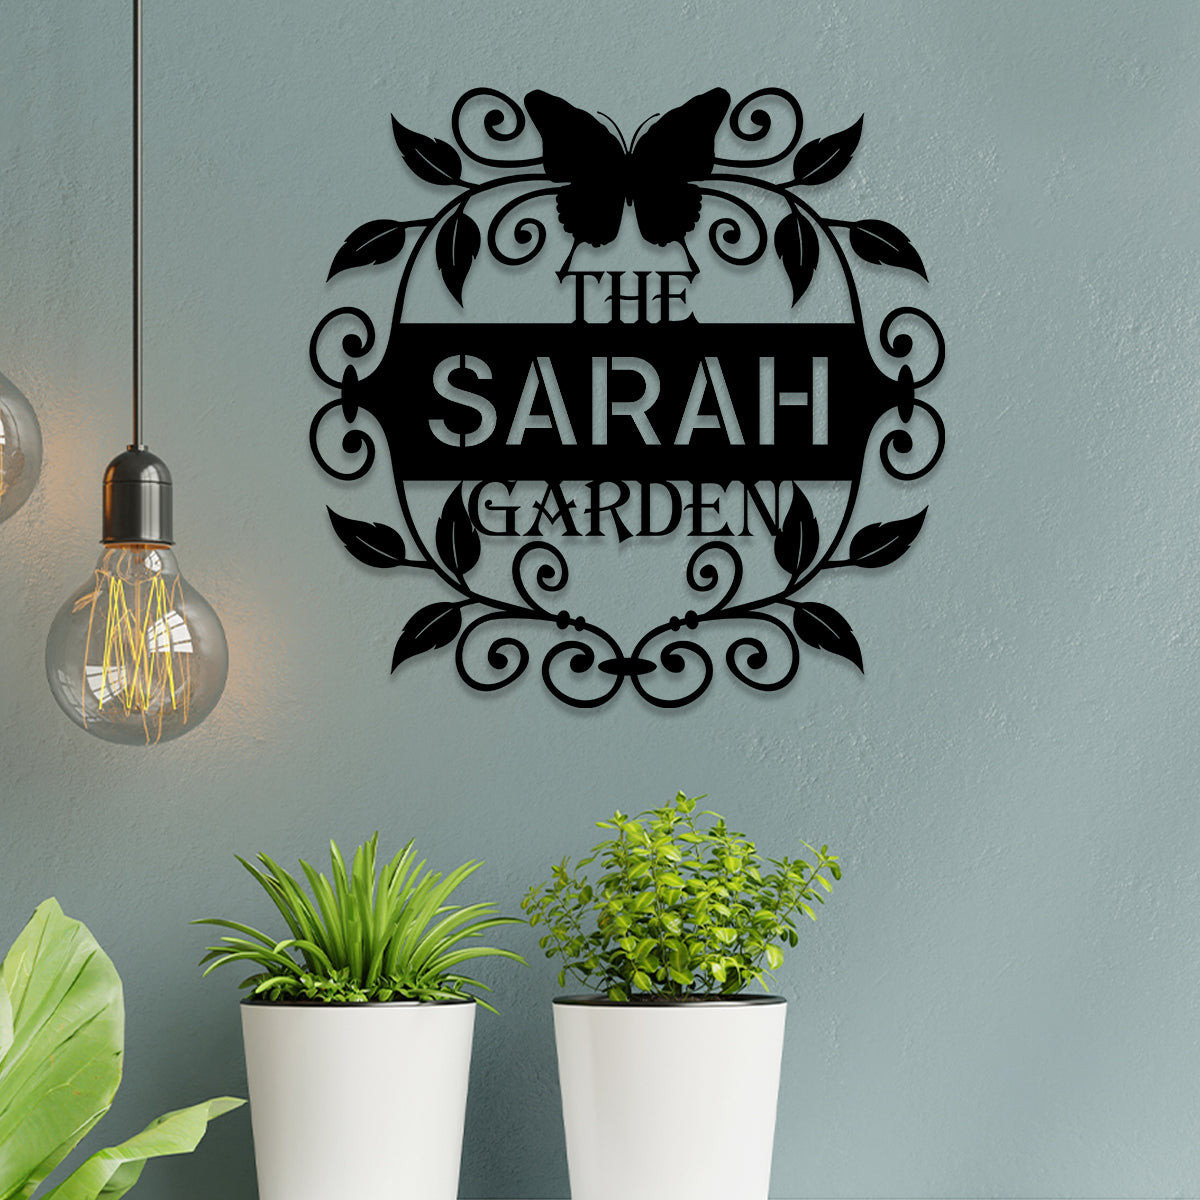 Personalized Metal Garden Sign, Home Decor, Wedding Gift For Her, Gardening Lovers, Metal Laser Cut Metal Signs Custom Gift Ideas 14x14IN